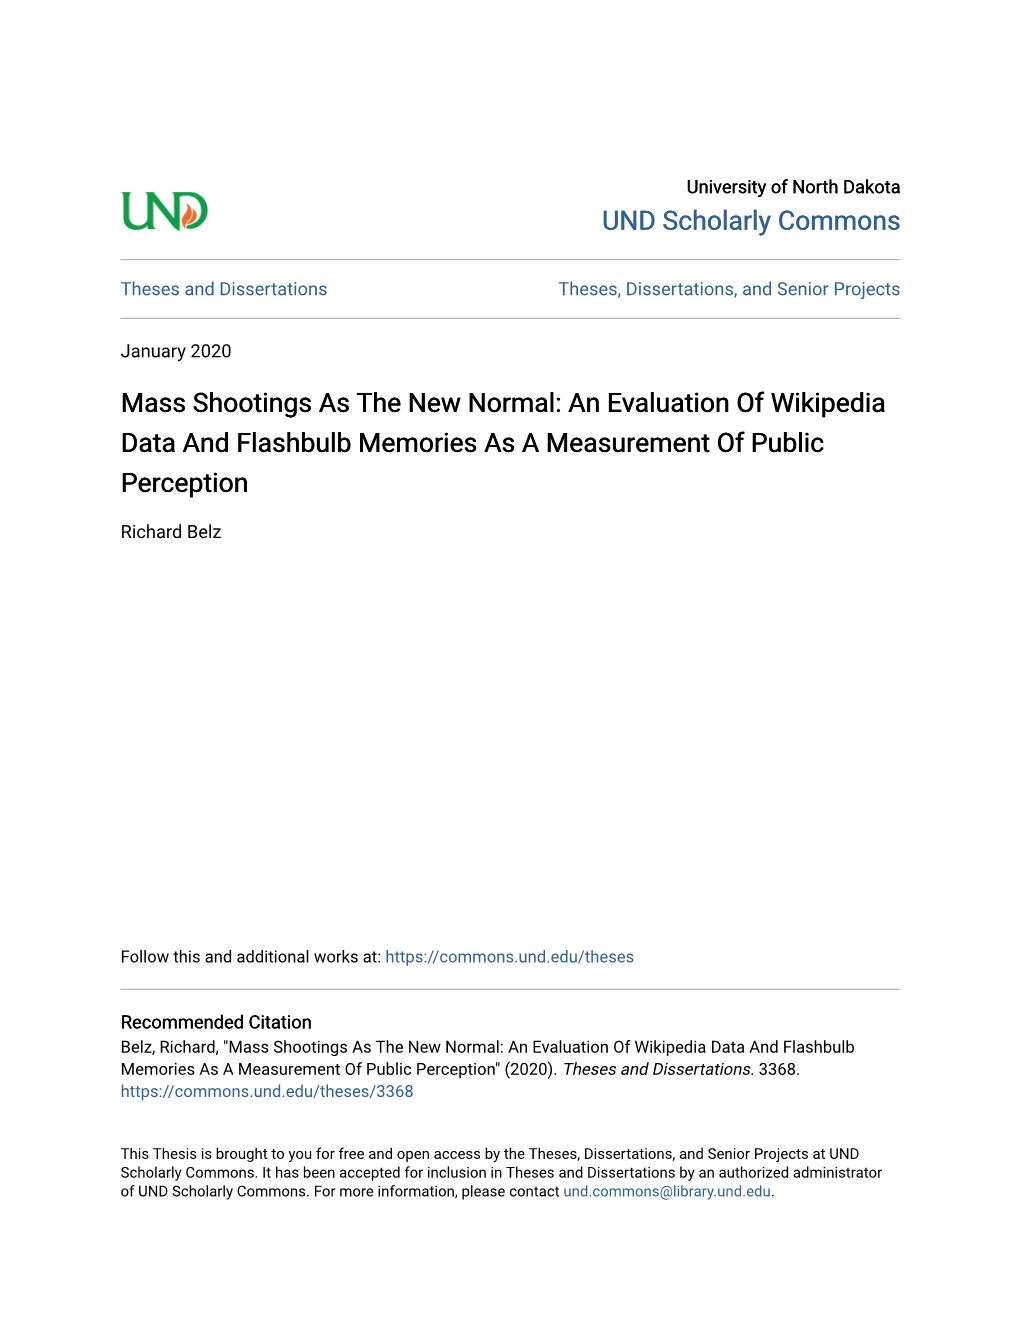 Mass Shootings As the New Normal: an Evaluation of Wikipedia Data and Flashbulb Memories As a Measurement of Public Perception